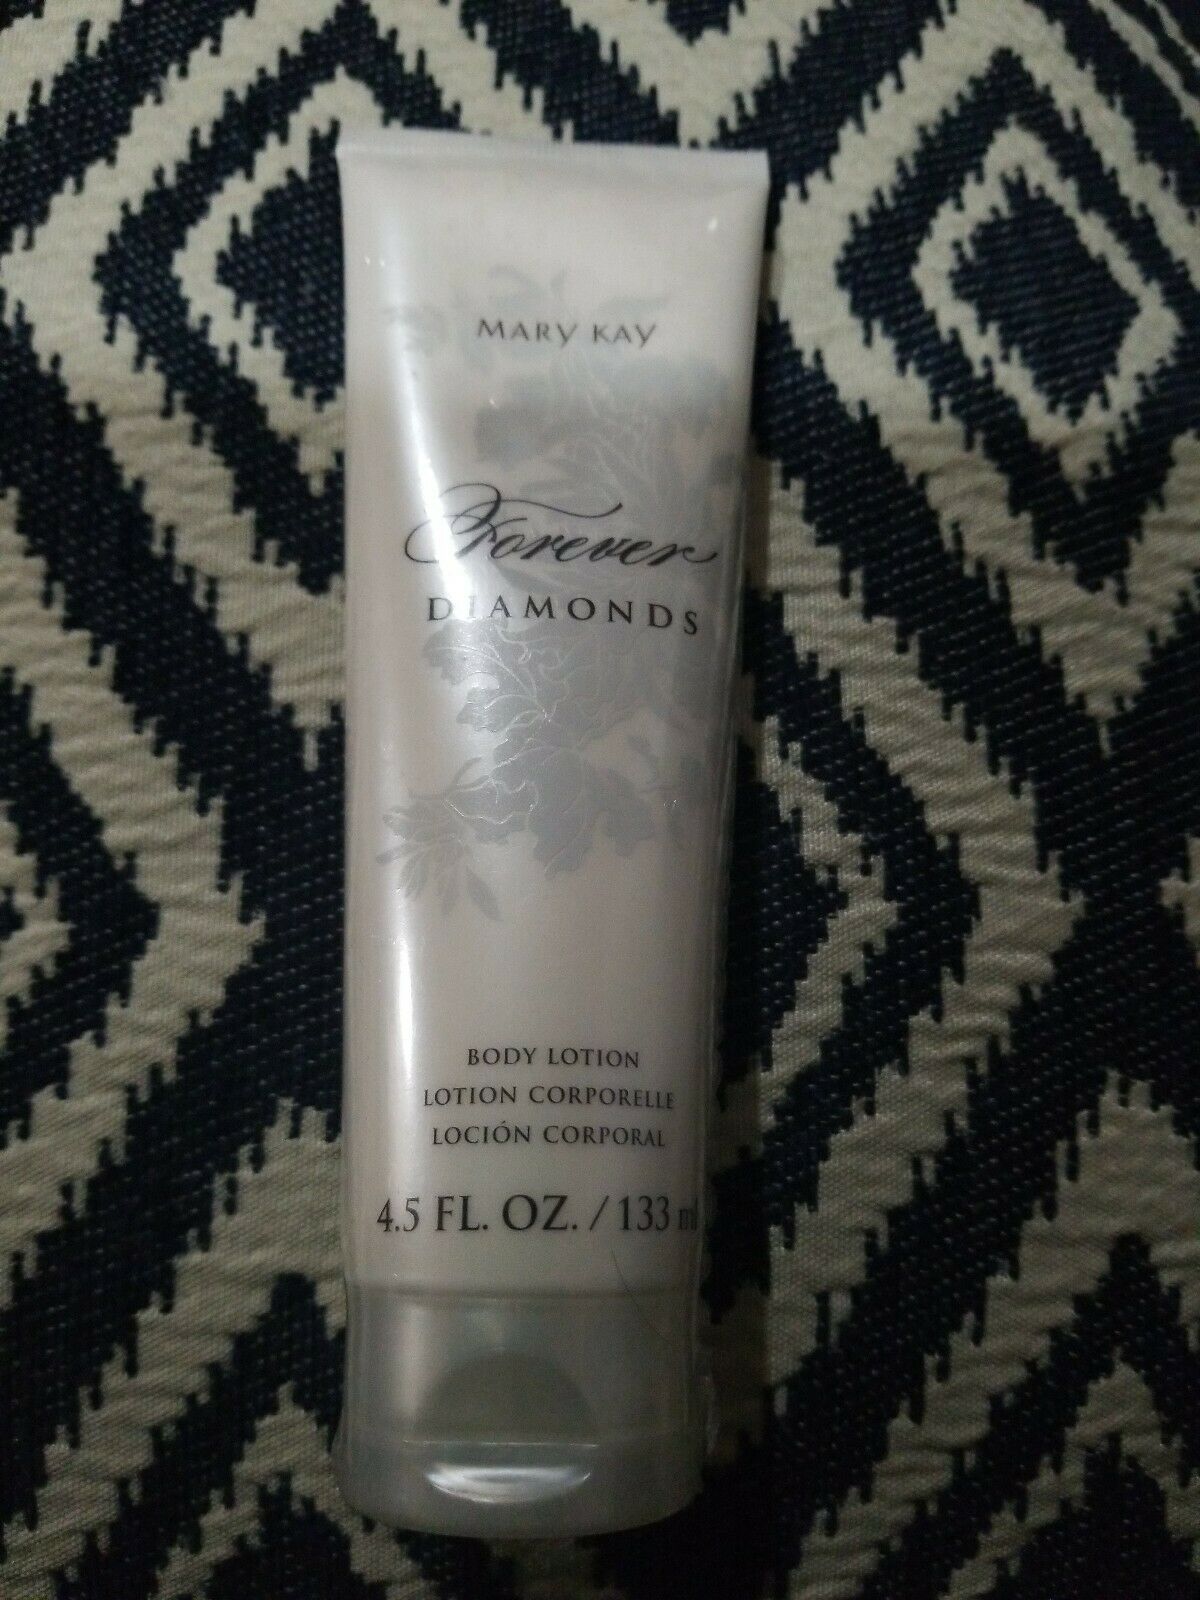 New & Sealed Mary Kay Forever Diamonds Body Lotion 4.5 fl oz ~ Quick Shipping